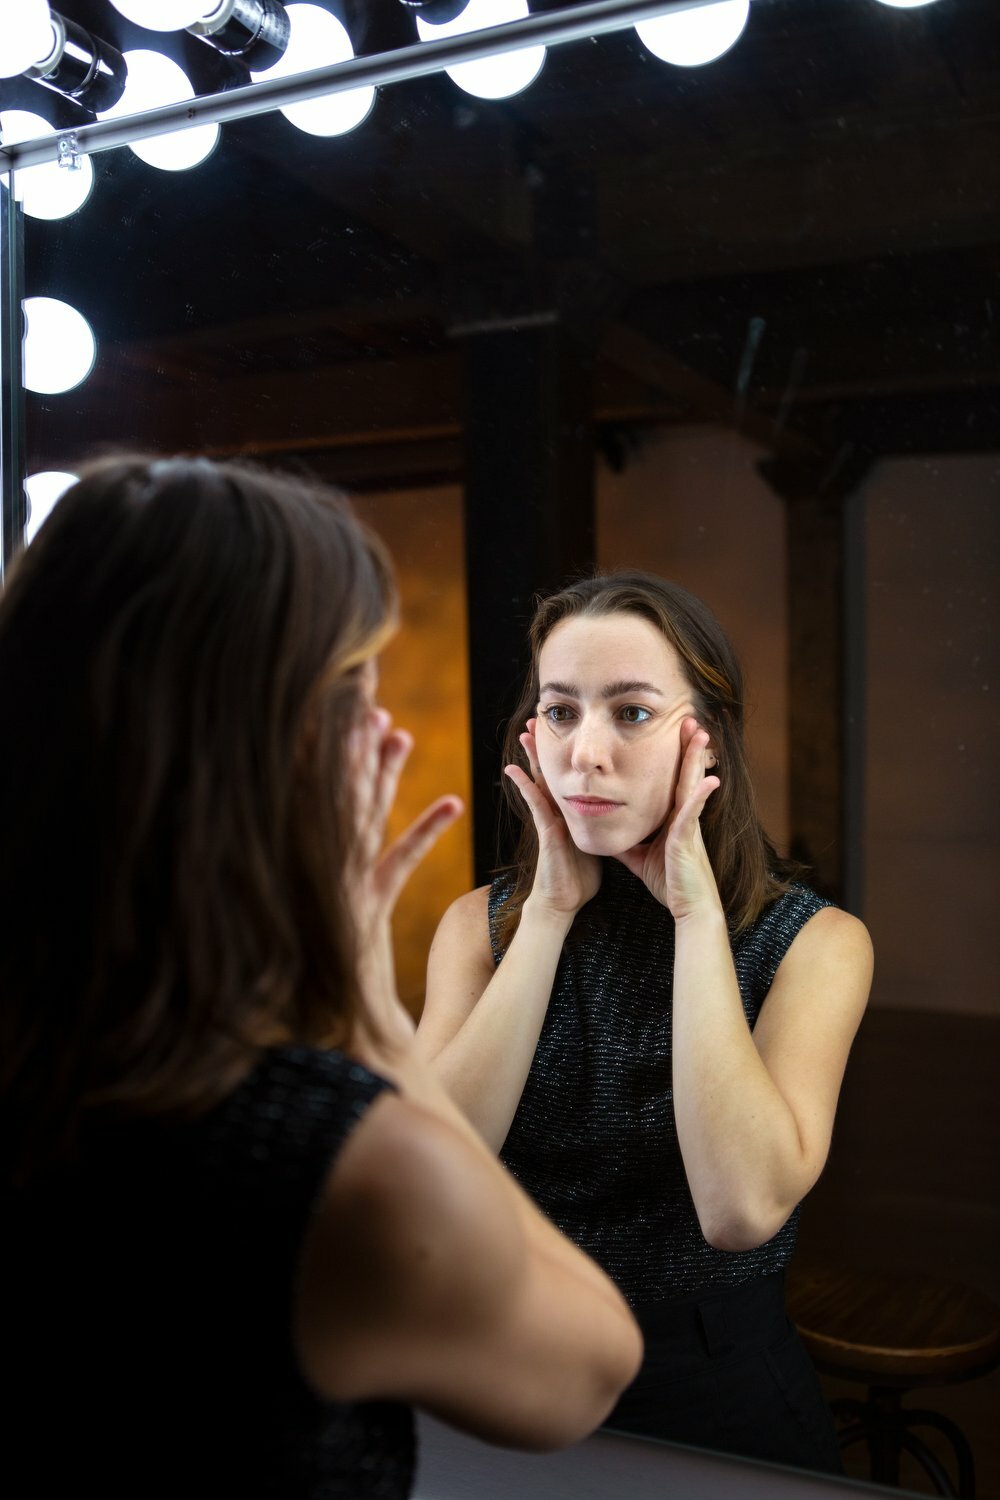 A woman with brown hair holds her face as she examines her reflection in a mirror